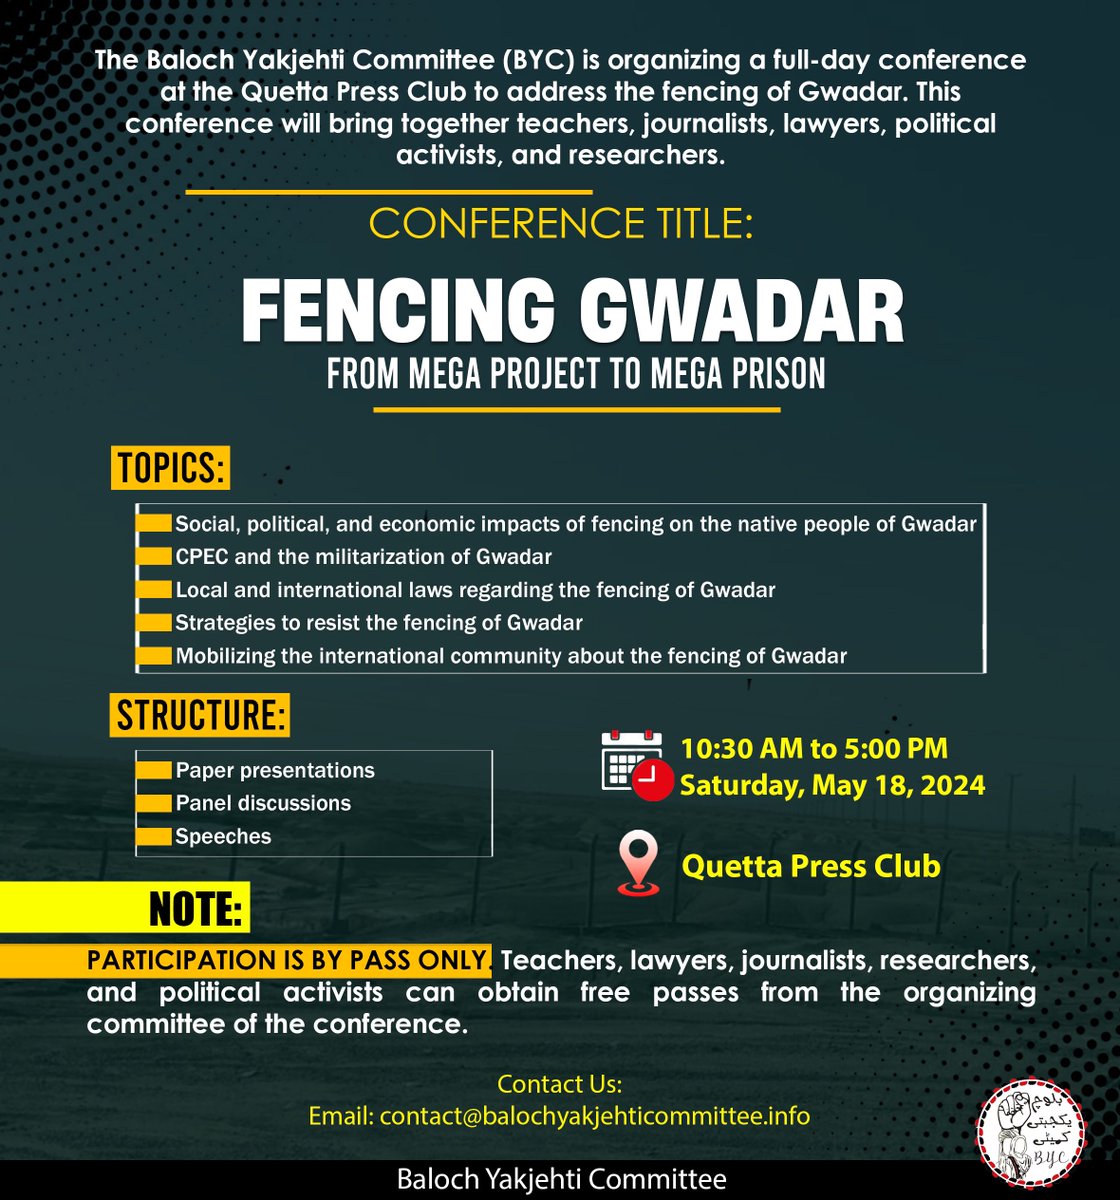 The Baloch Yakjehti Committee (BYC) is organizing a full-day conference at the Quetta Press Club to address the fencing of Gwadar. This conference will bring together teachers, journalists, lawyers, political activists, and researchers. Conference Title: Fencing Gwadar: From